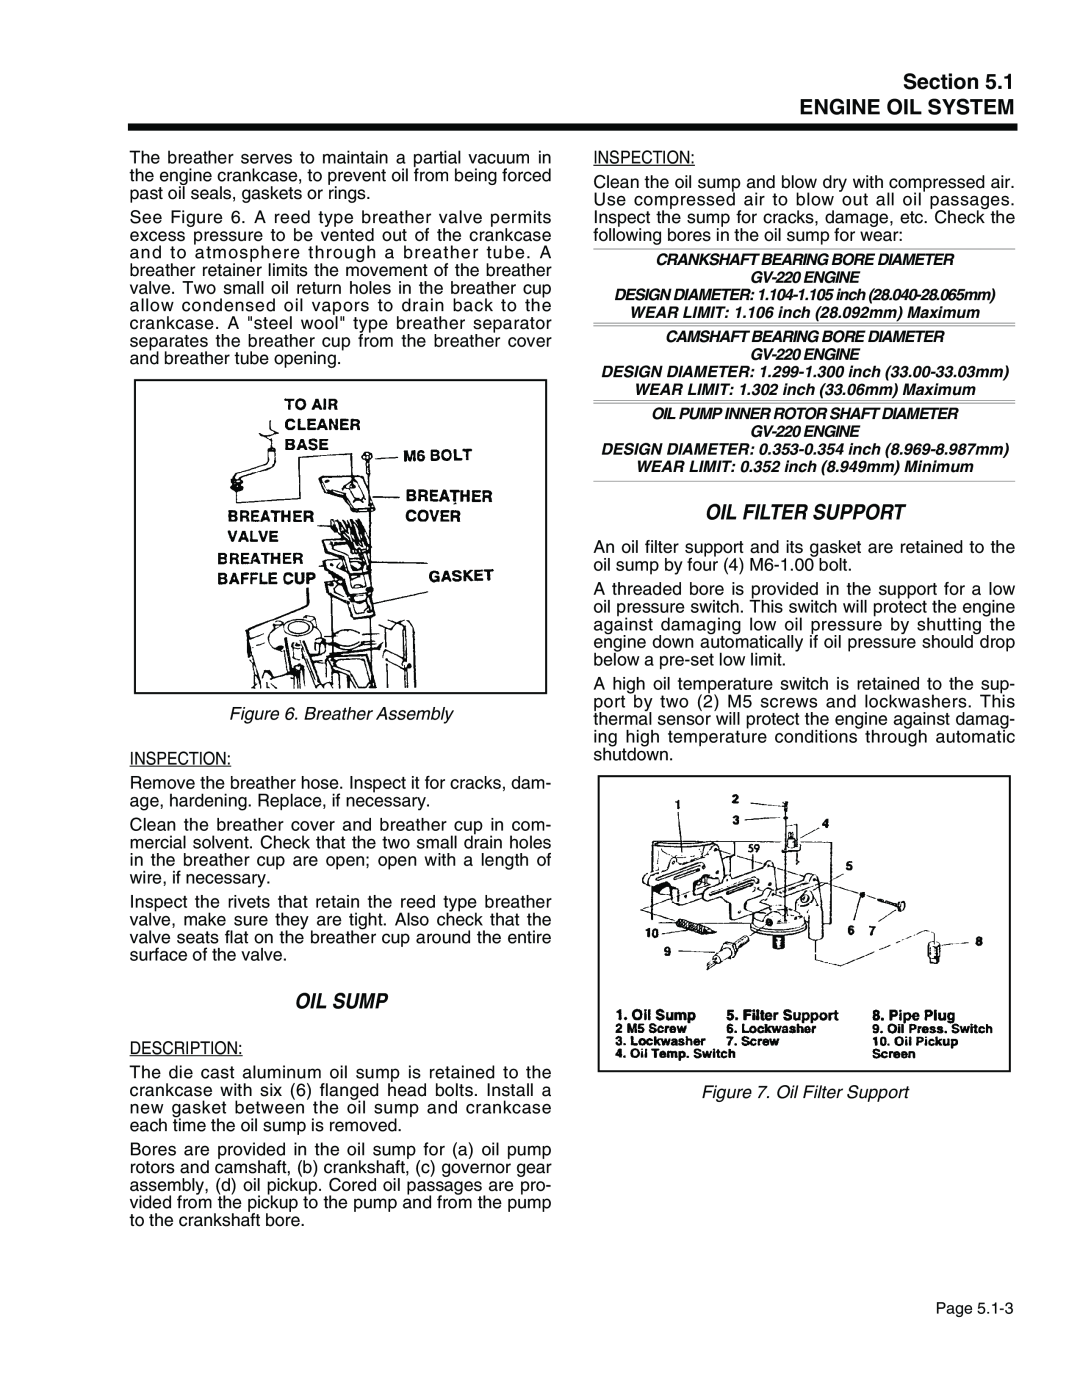 Generac Power Systems 941-2, 940-2 service manual Oil Sump, Oil Filter Support, Breather Assembly, Section ENGINE OIL SYSTEM 